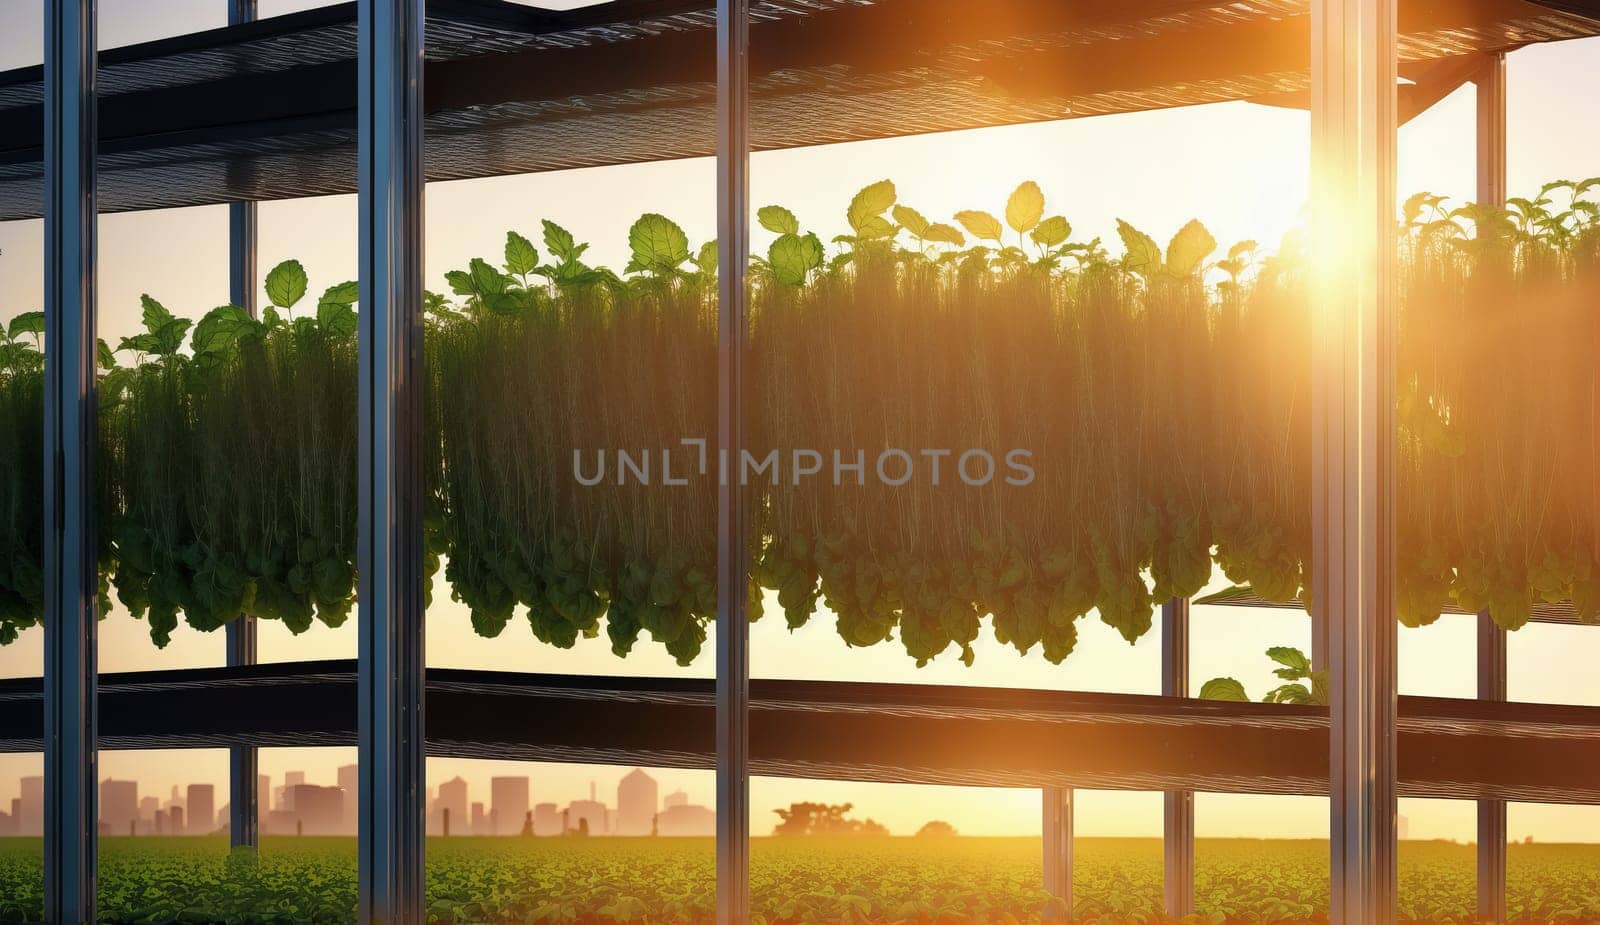 A wooden greenhouse with plants inside, sunlight streaming through windows, creating tints and shades on the grass and trees outside